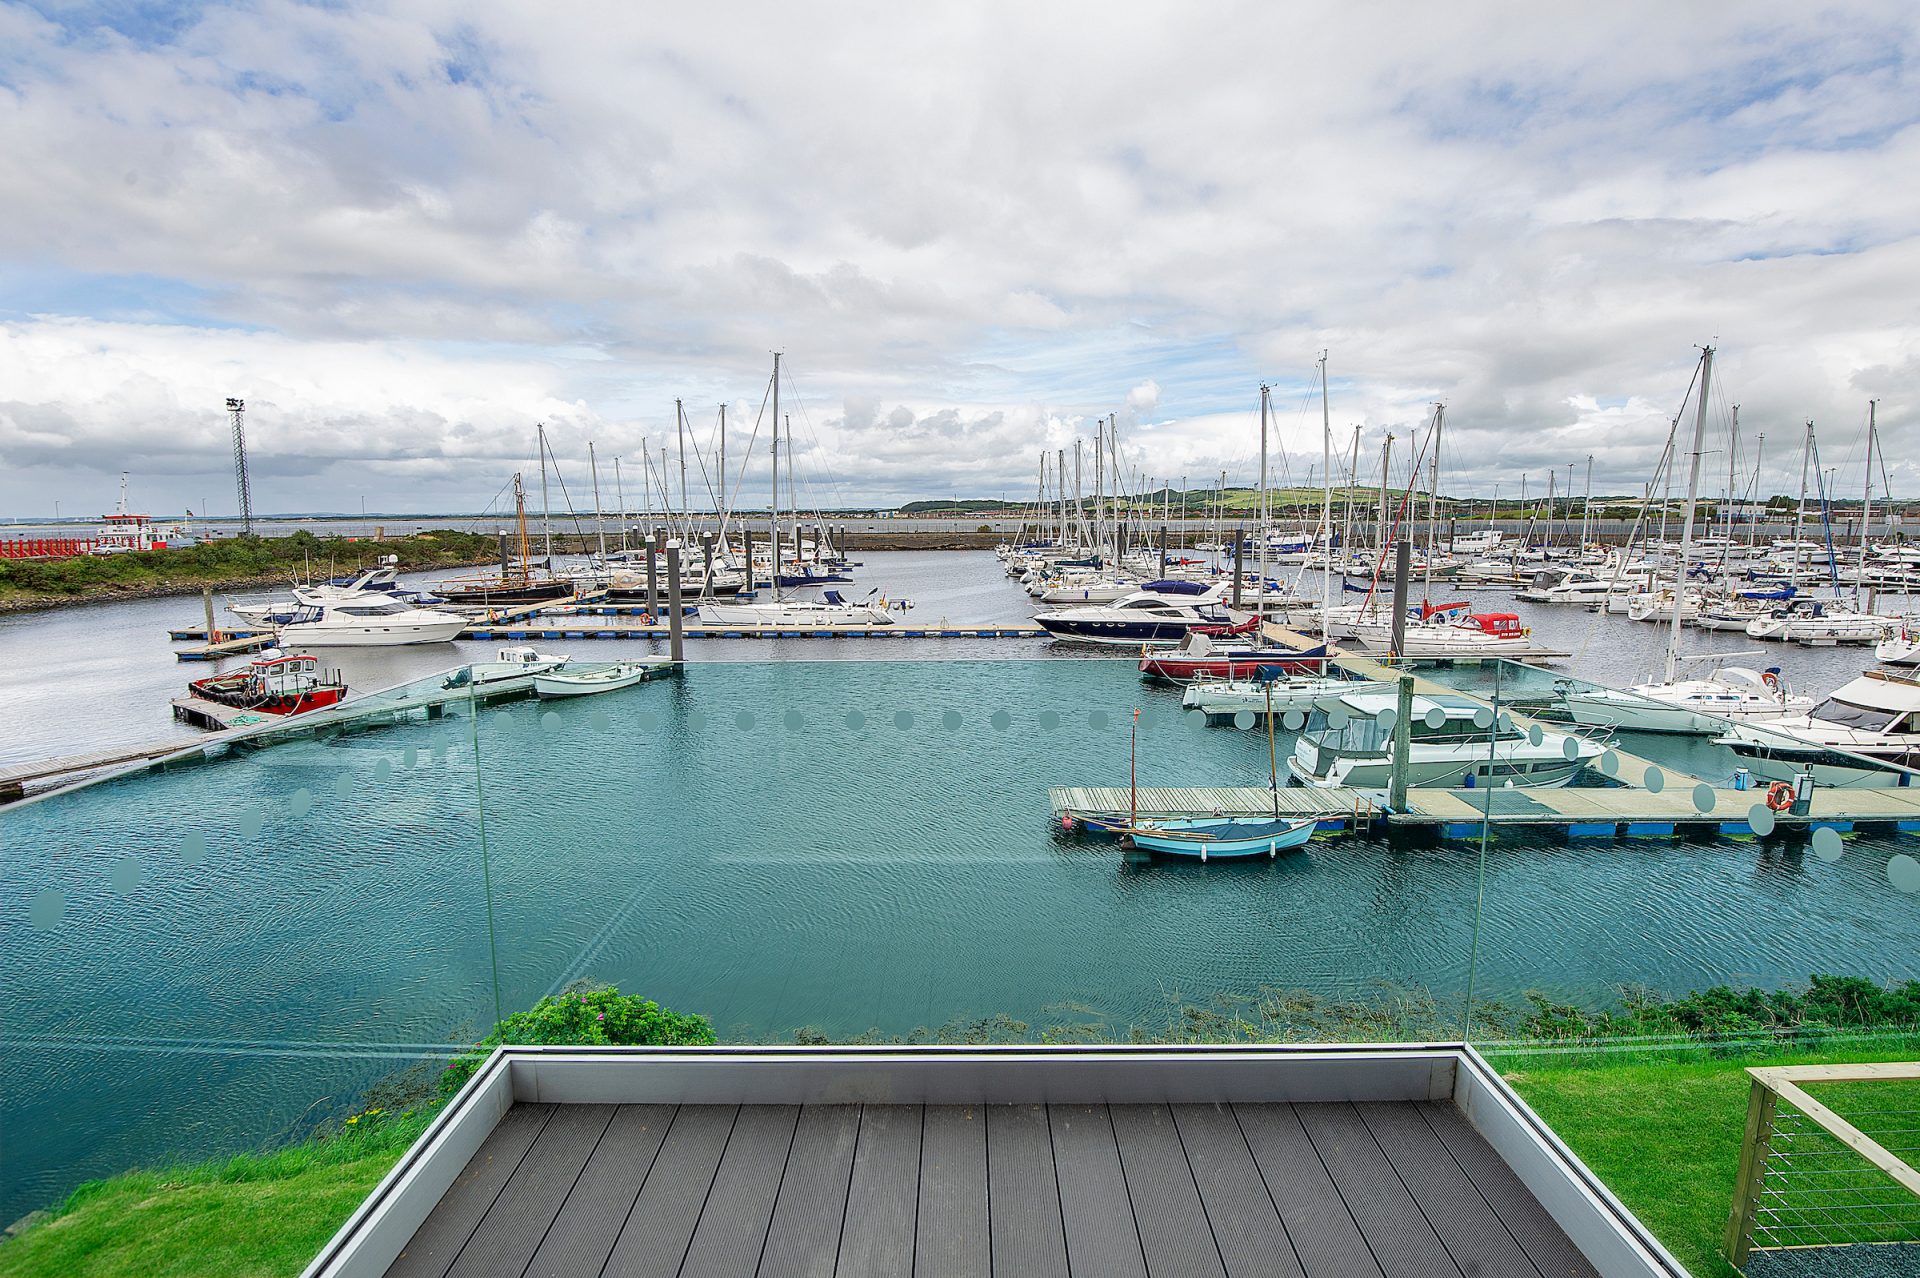 A view of Troon Marina from the Salt Lodge Hotel's balcony